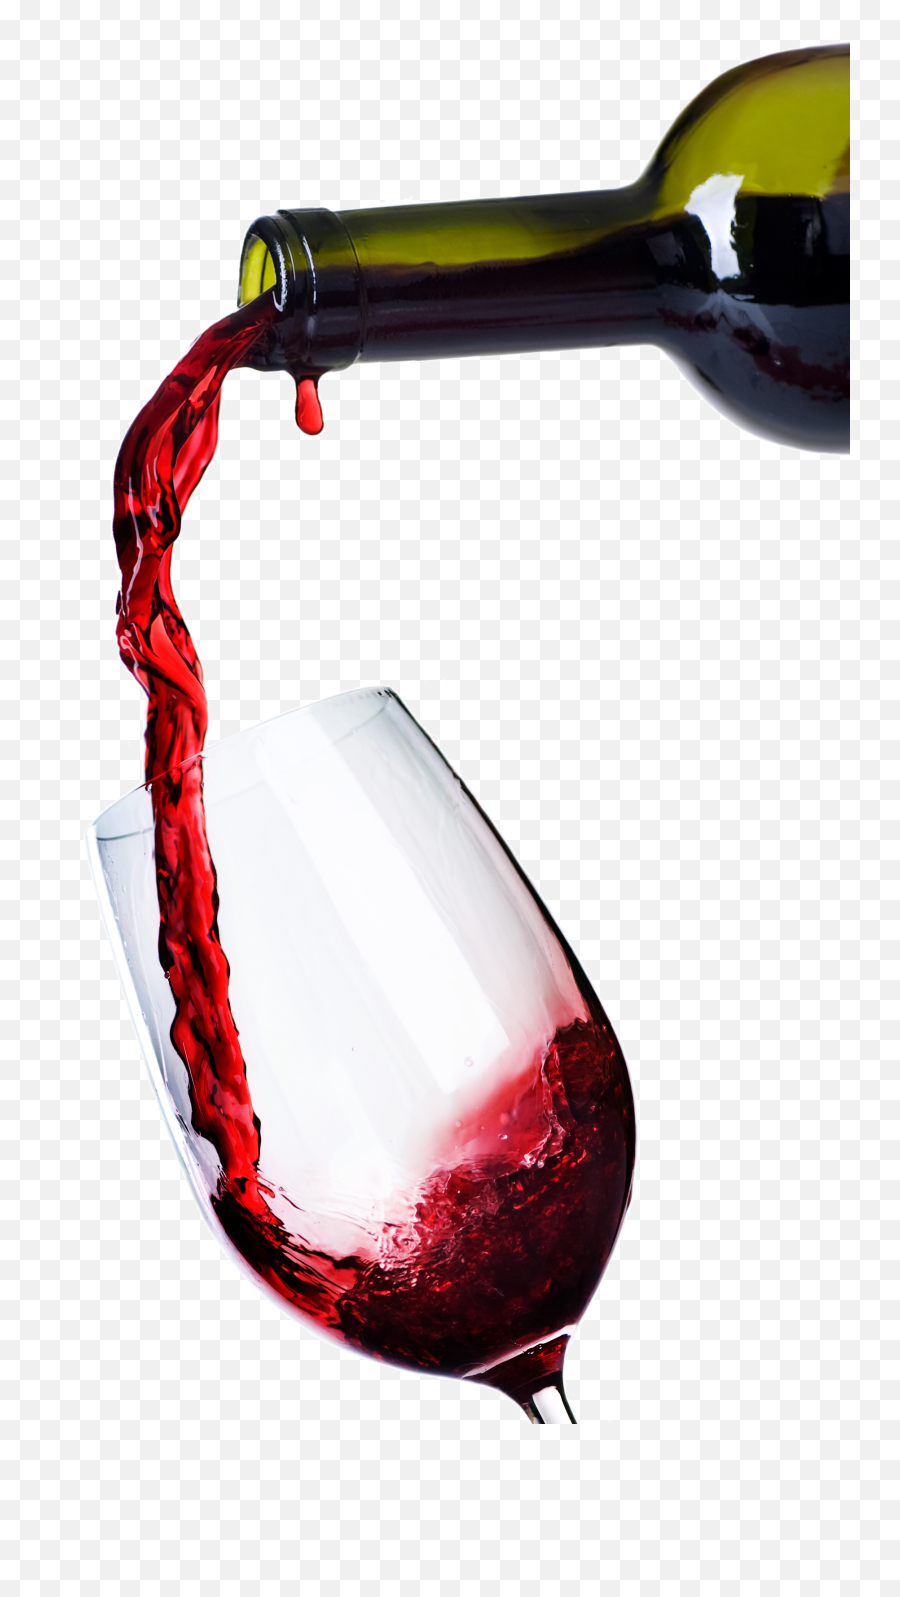 Pouring Wine Png - Bigstock Red Wine Pouring Wine Red Wine Pouring Transparent Emoji,Wine Glass Emoticon